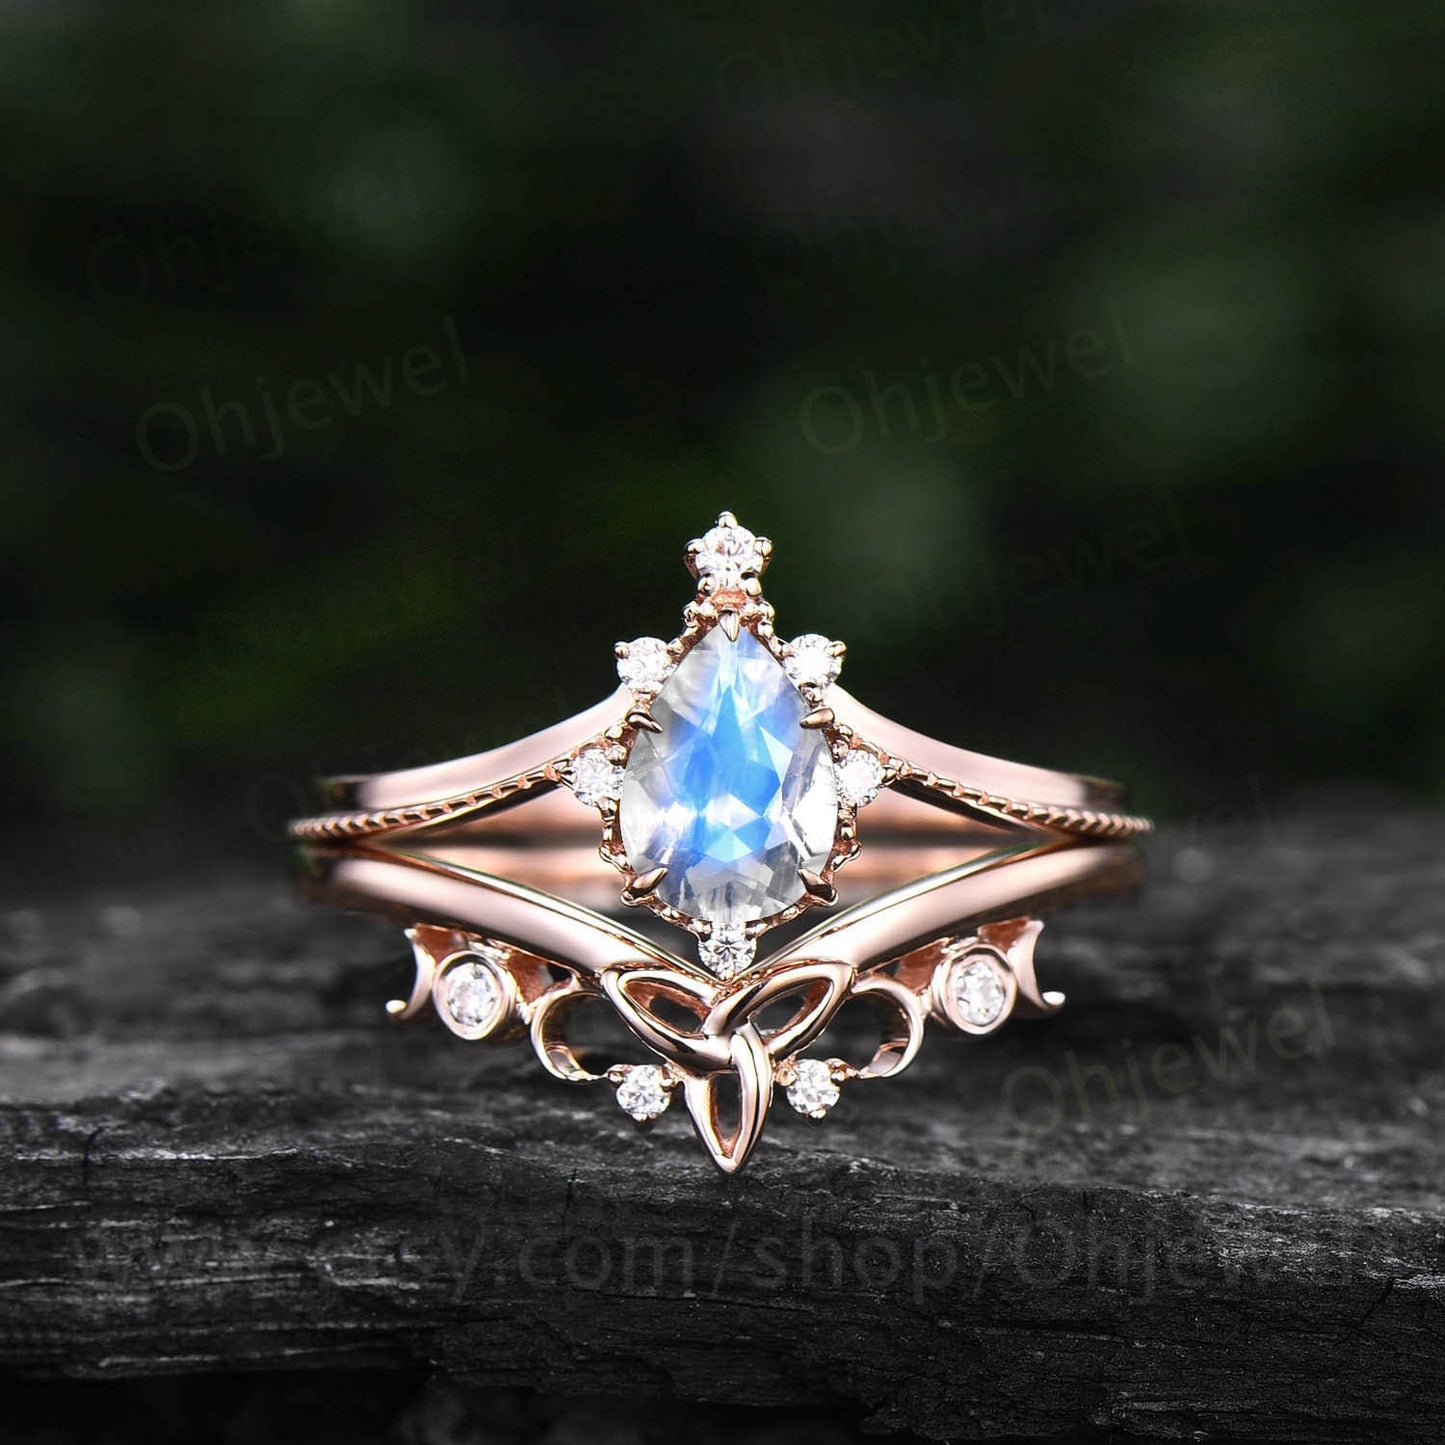 Pear shaped moonstone engagement ring set 14k white gold unique vintage engagement ring moissanite ring for women Norse Viking ring jewelry